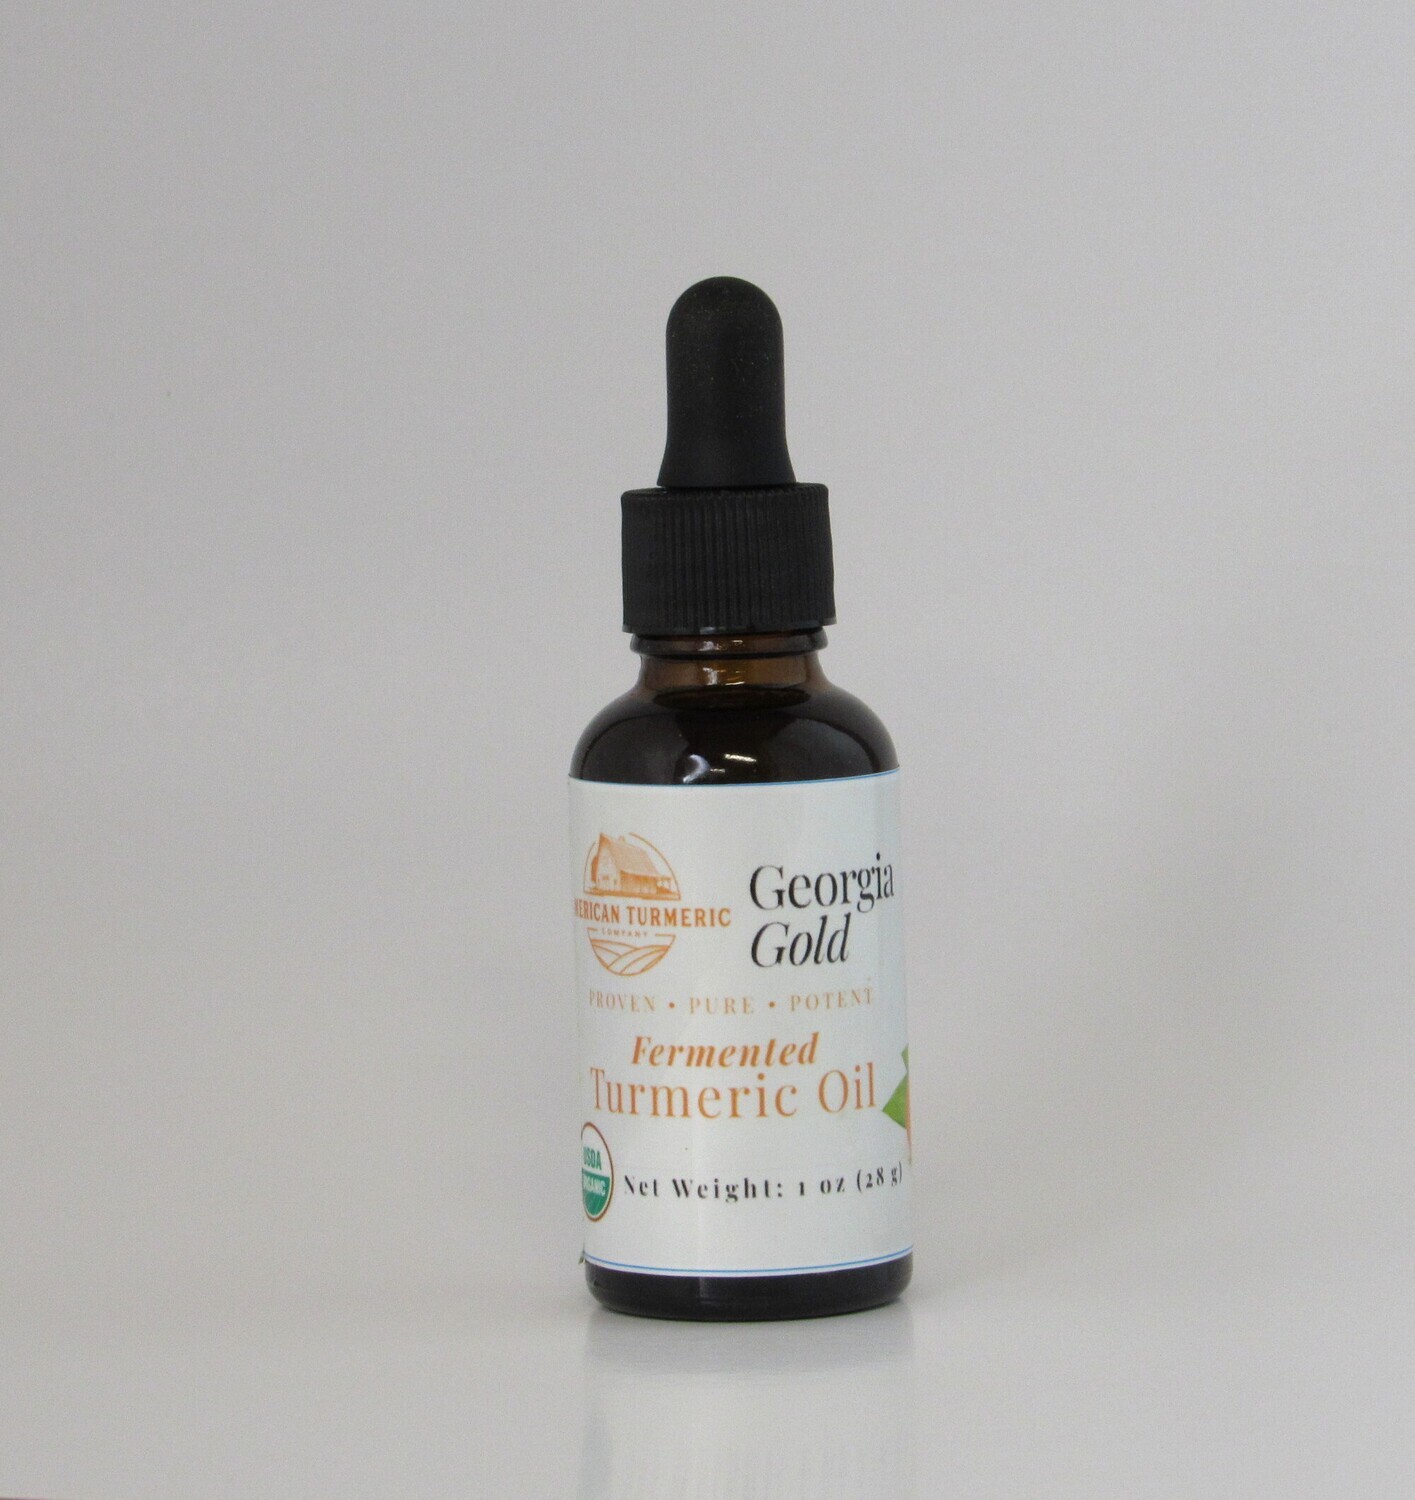 Fermented Turmeric Oil Extract - Concentrated Turmeric Goodness in Easy to Use Form